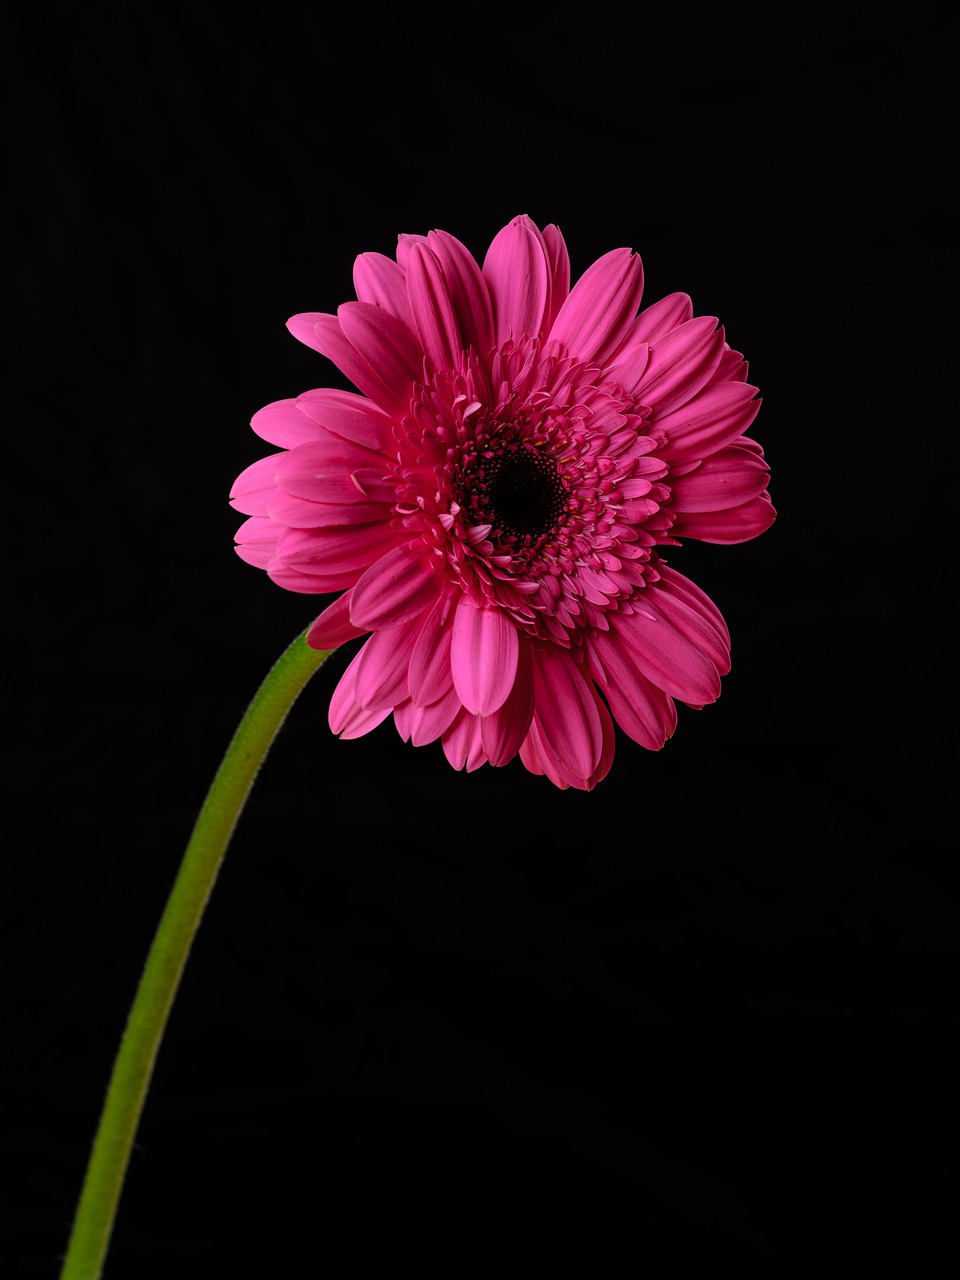 Gerbera Meaning: Strength, Beauty Innocence and Friendship